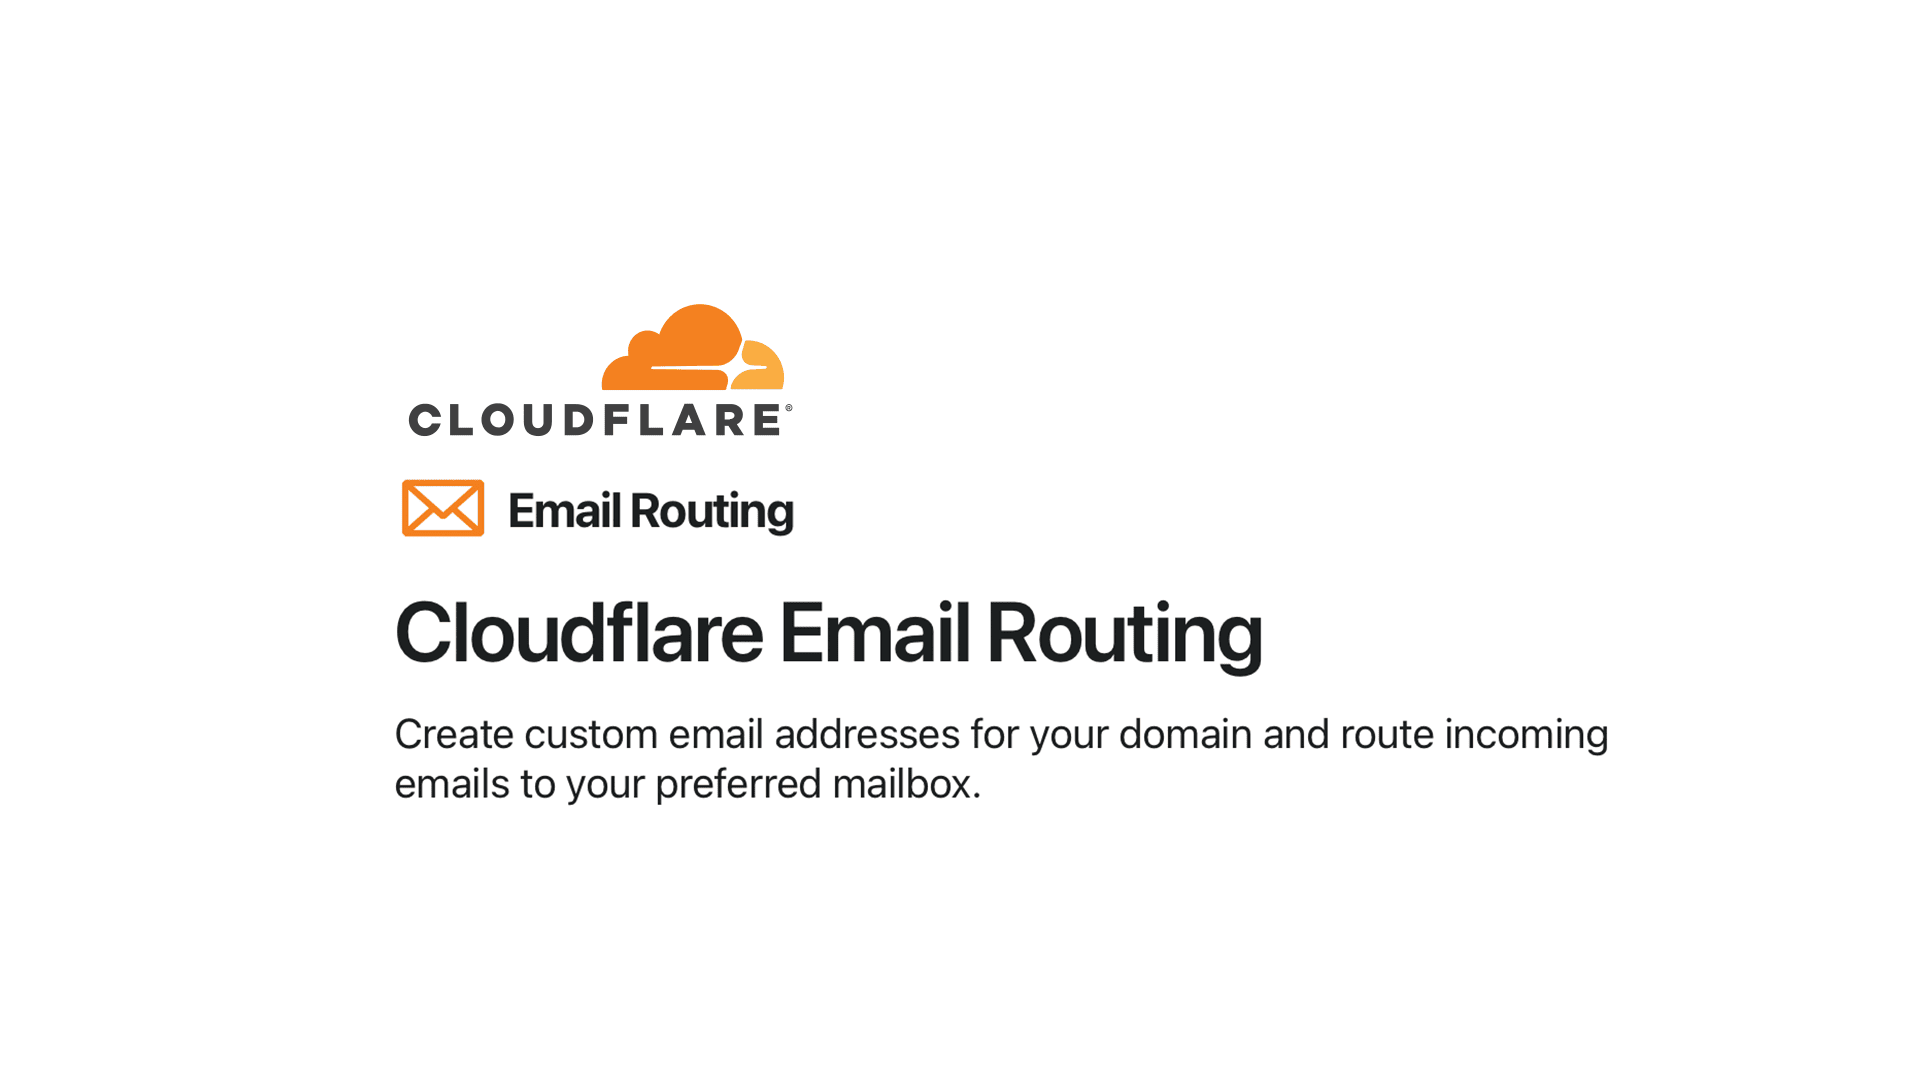 Email in your own domain with Cloudflare (and Gmail)